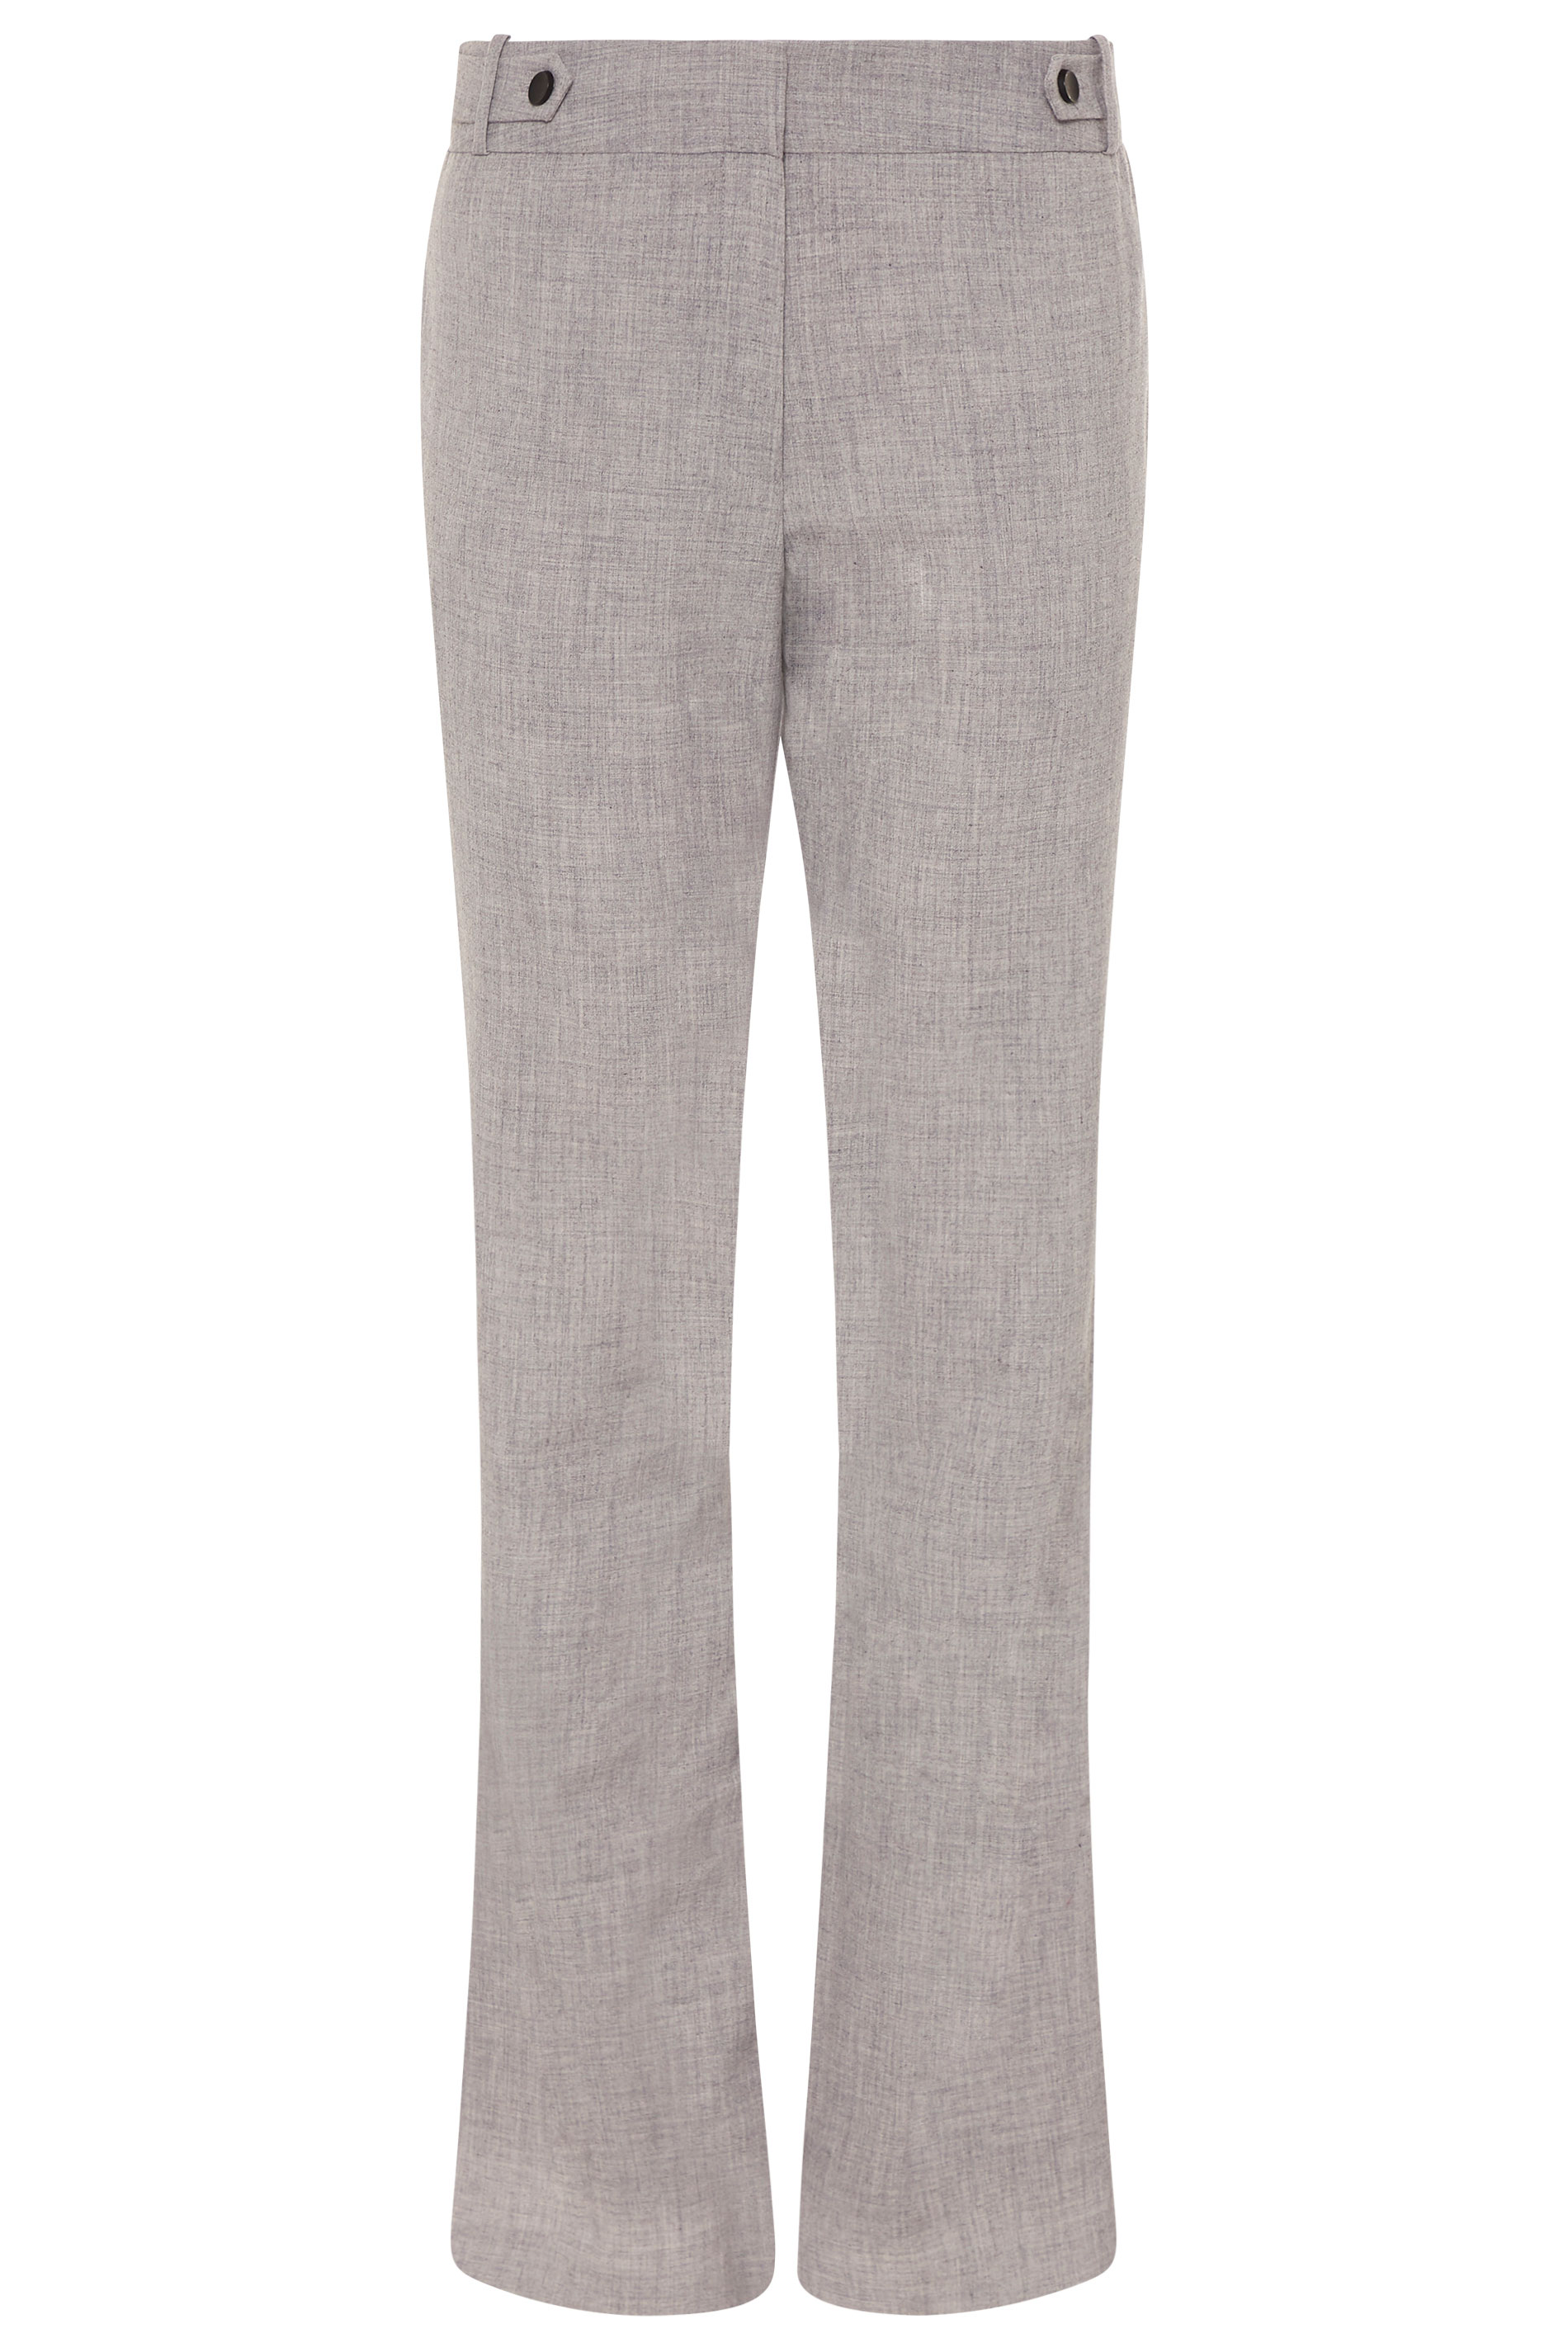 Grey Bootcut Suit Trousers | Long Tall Sally